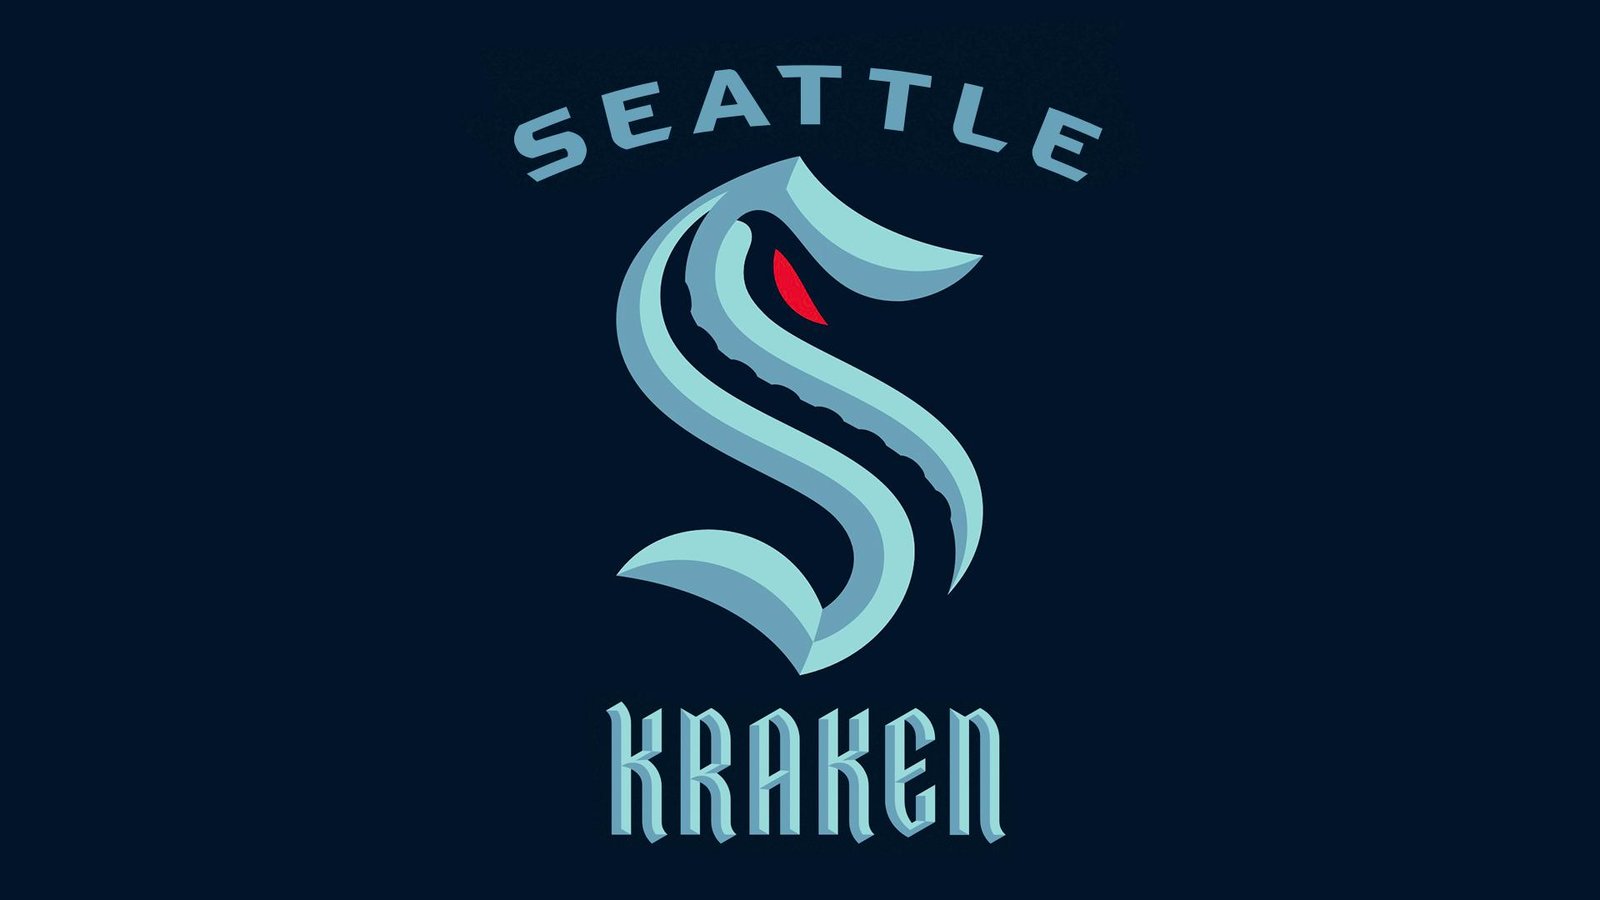 Seattle Kraken 3rd Jersey Concept !! I really love this team